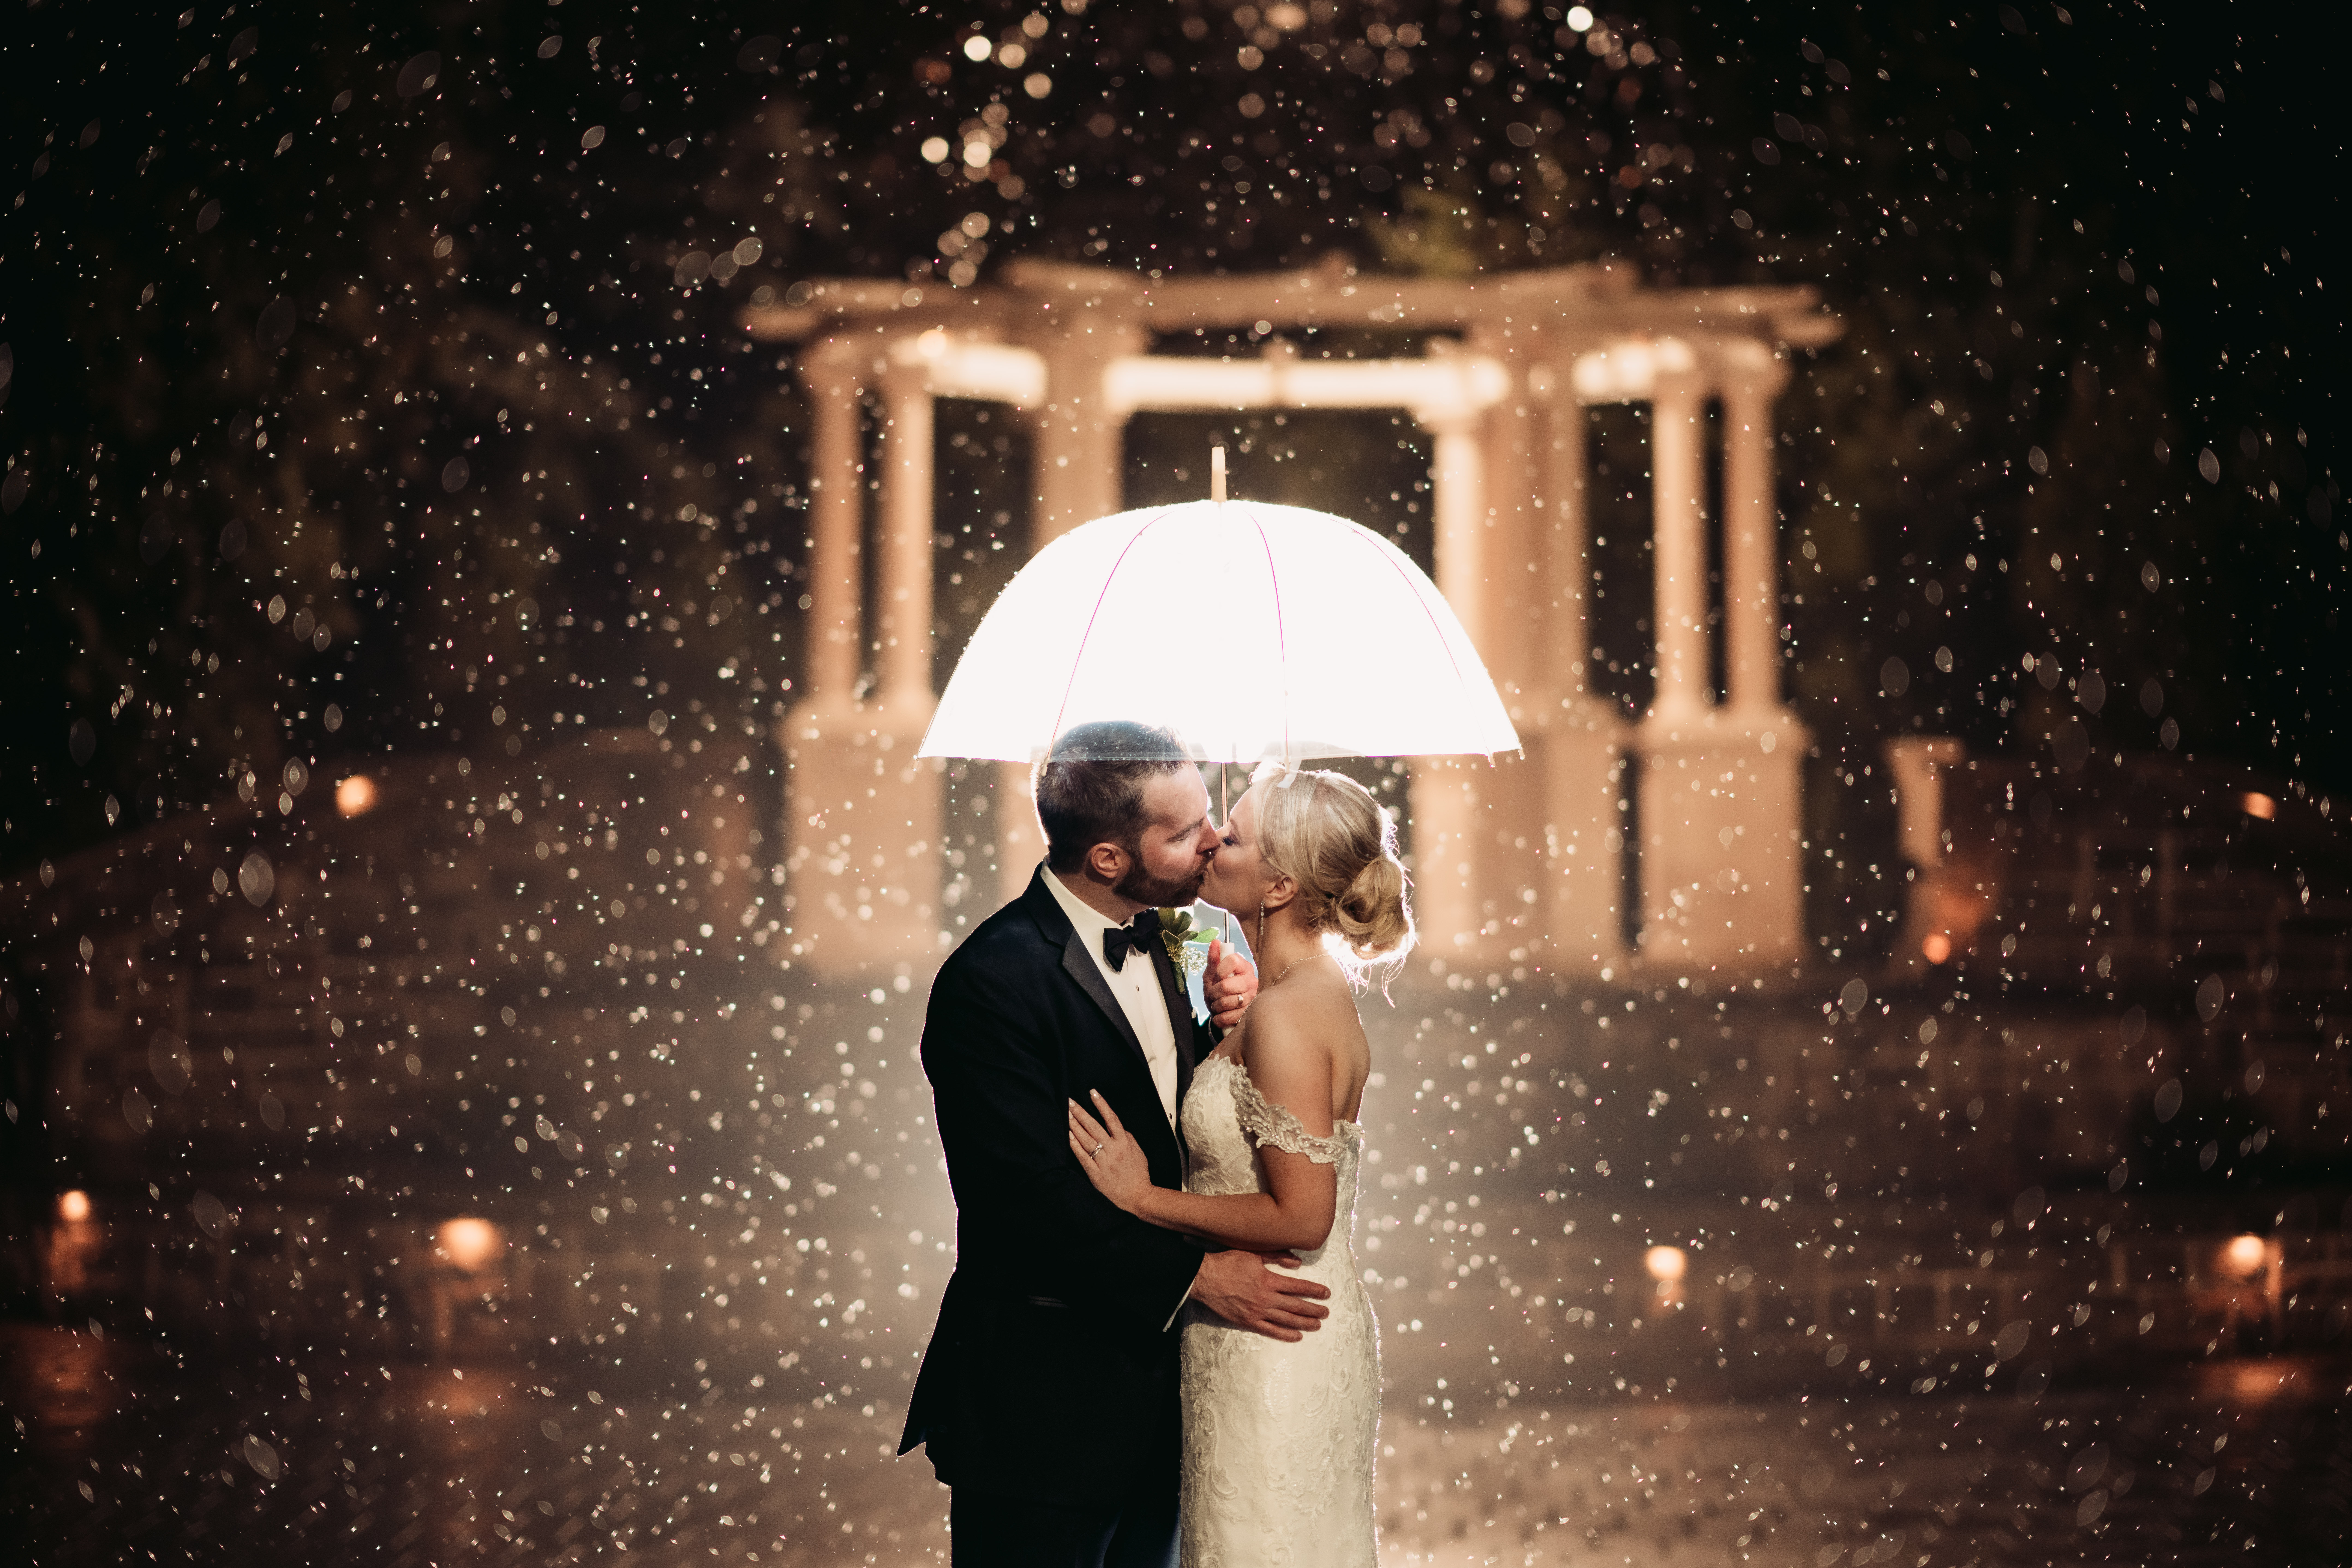 Valley Regency Wedding Photographer, Vally Regency Wedding Venue, New Jersey Weddings, NJ Wedding Photographer, Montclair Weddings, Montclair Wedding Photographer, NJ Winter Wedding, Winter Wedding, bride and groom kissing while holding a clear umbrella as it snows around them while being backlit with a flash 